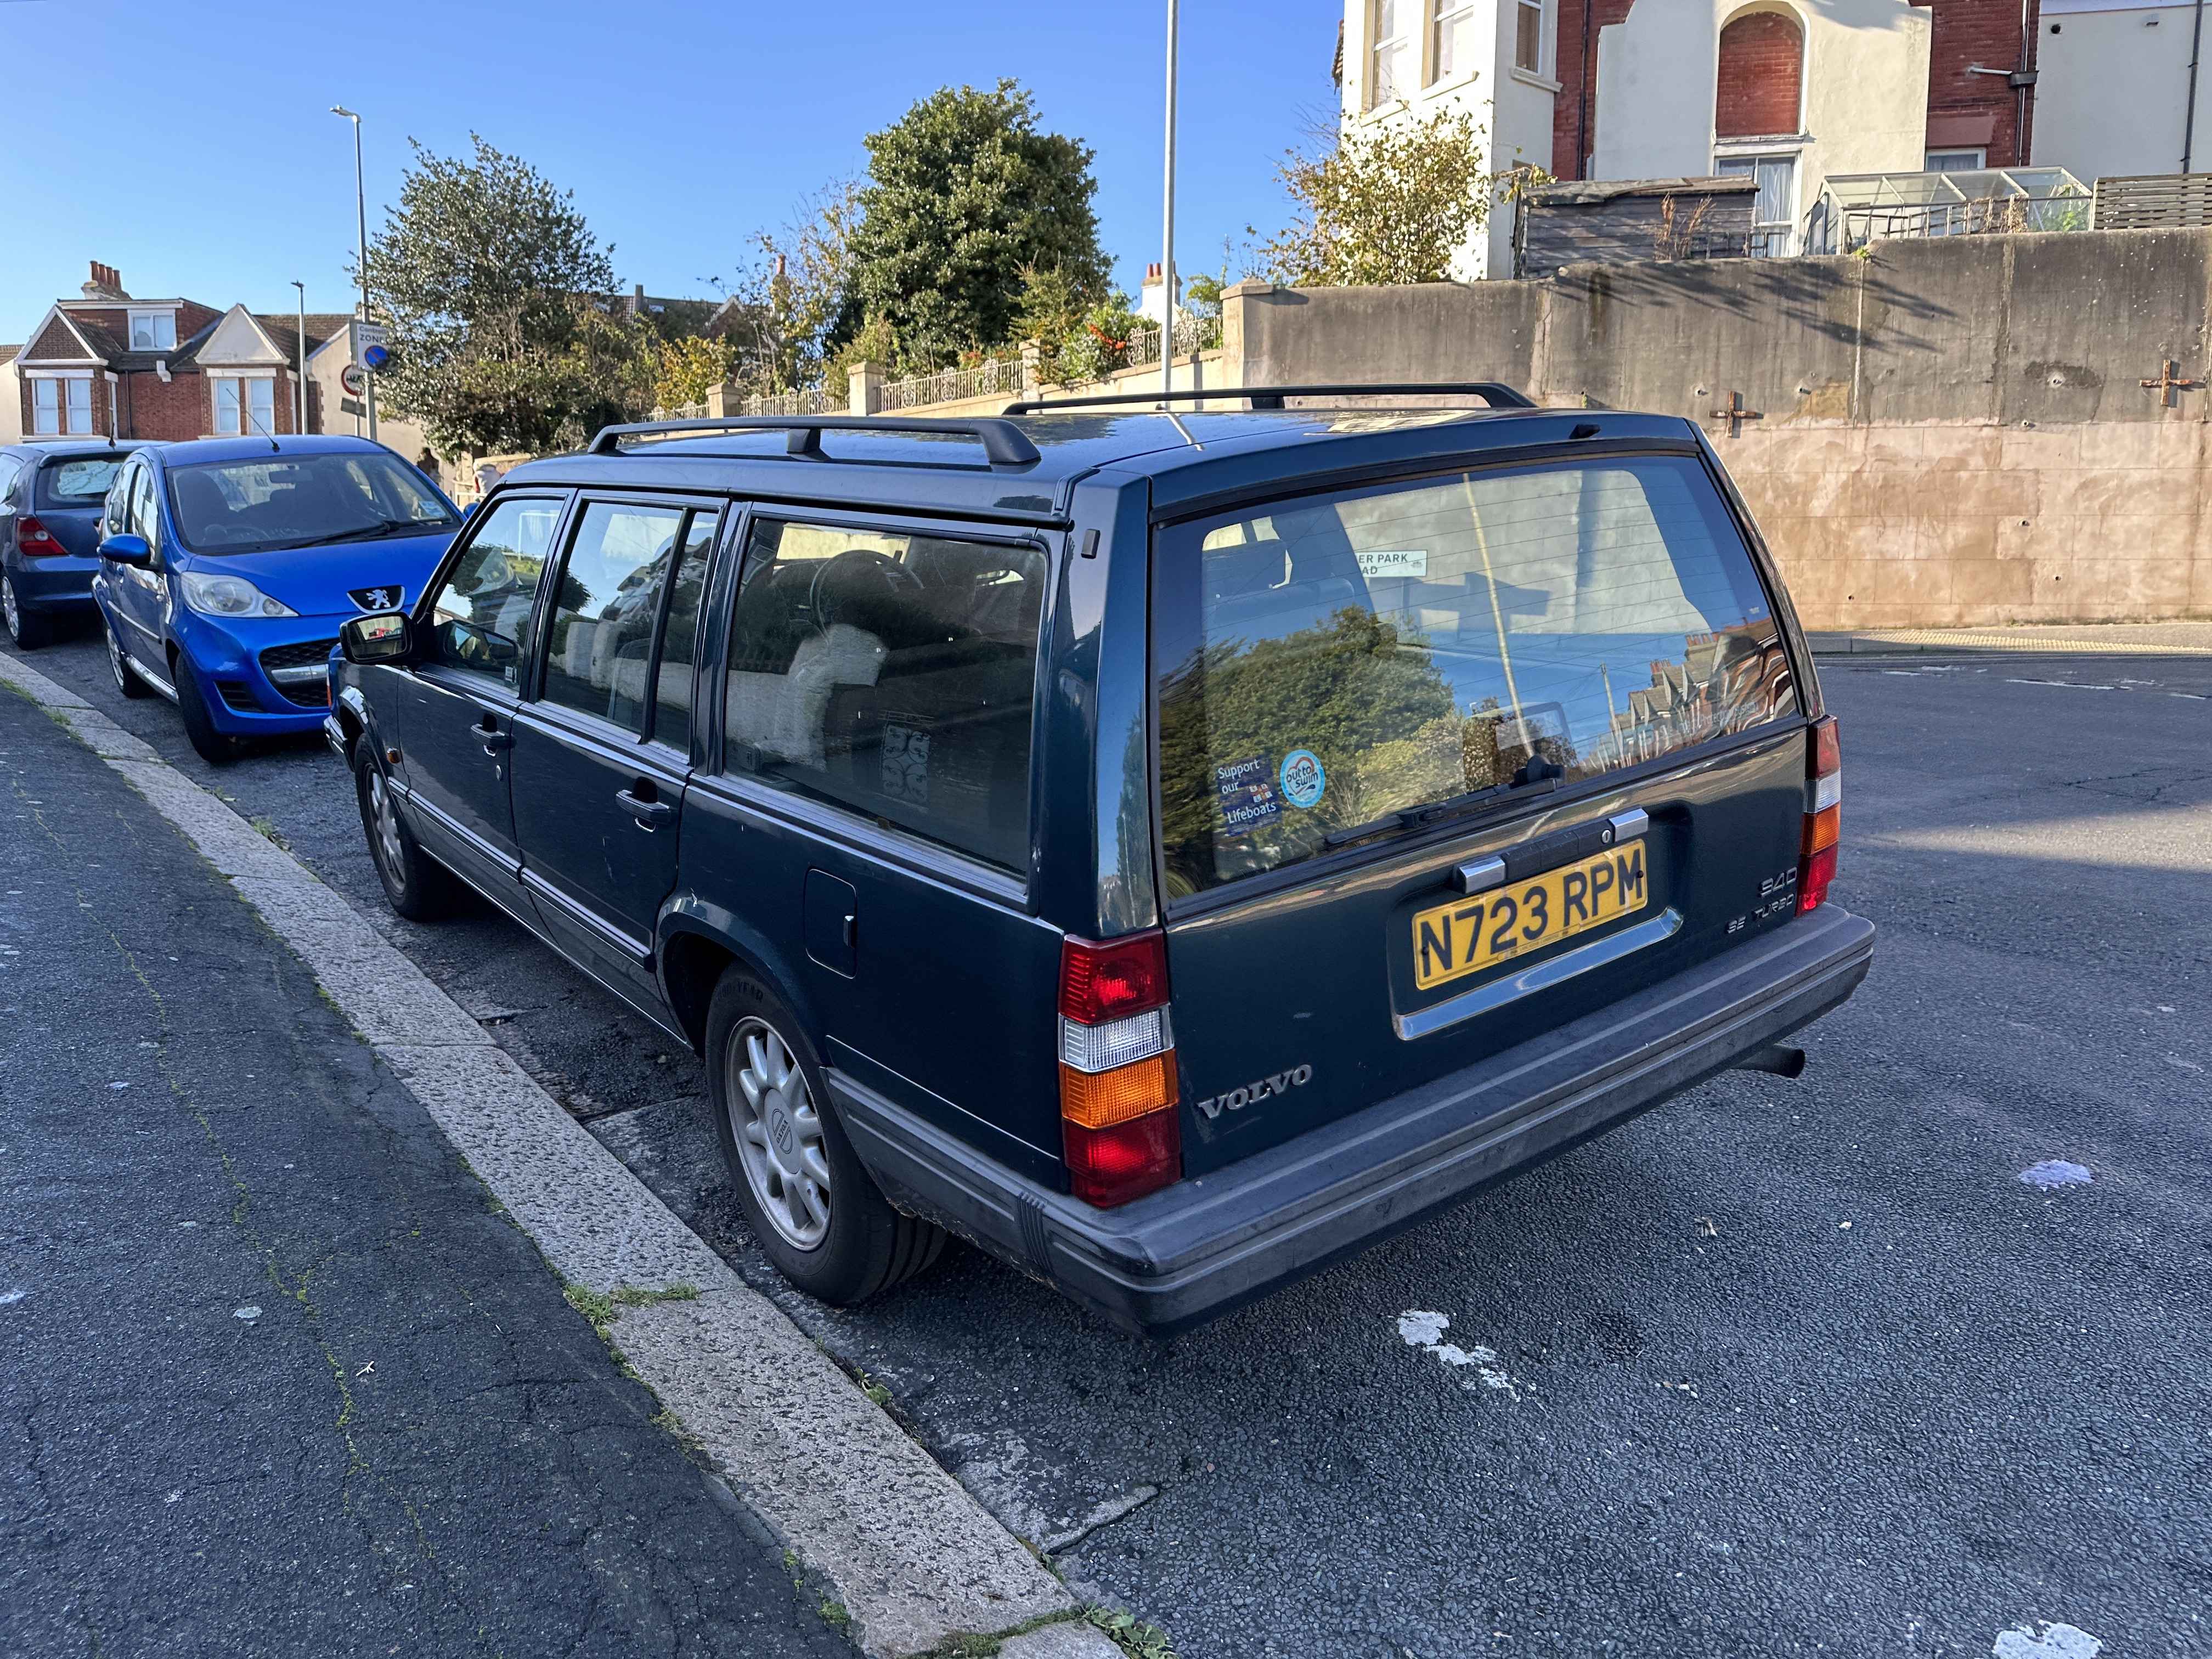 Photograph of N723 RPM - a Green Volvo 940 parked in Hollingdean by a non-resident who uses the local area as part of their Brighton commute. The third of three photographs supplied by the residents of Hollingdean.